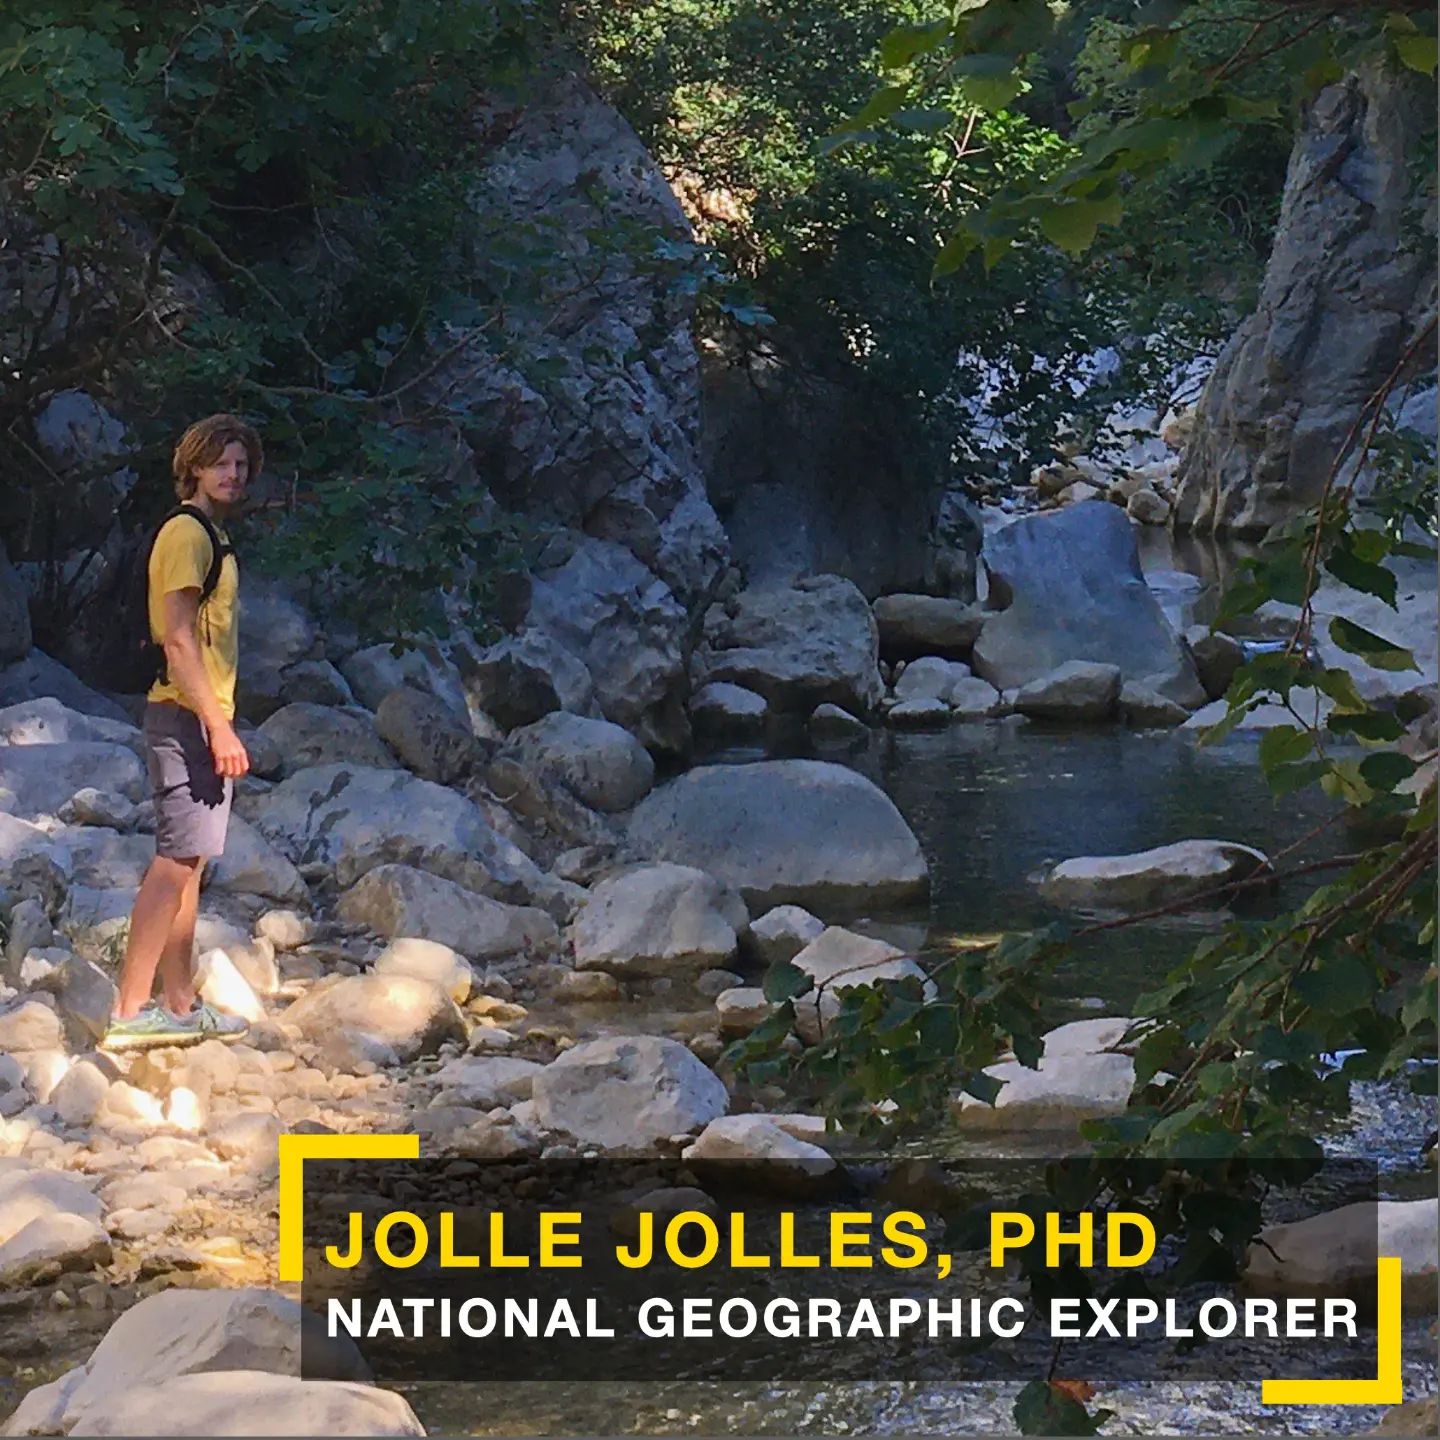 I am very excited to say that as of now I am a National Geographic Explorer! I succesfully applied to an independent grant from the National Geographic Society to help set up the fieldwork component of my project here in Catalunya focused on unravelling how freshwater fish deal with drought 🐟☀️🤿.
I will be studying in high spatial and temporal detail how drought changes the stream habitat over time and how that affects the movements and distribution of fish. Specifically, I want to understand how the availability and quality of habitats changes during droughts and how fish distribute themselves in response to these harsh changes, including how they avoid dry areas and may survive in refuge pools. The fieldwork will provide a crucial link with the behavioural studies I will be doing in the lab to better understand the potential individual and social mechanisms underlying how fish cope with drought.
I am extremely happy that National Geographic sees the potential of my work, which thereby provides a key stepping stone that can help me establish my own indedepent long-term field study here in Catalunya. As a National Geographic Explorer I am more dedicated than ever to provide insights into all the work I will be doing, so watch this space 📸!
#insidenatgeo #natgeo #researchgrant #fieldwork #freshwaterecology #explorer  #ecology #descobreixcatalunya #riusdecatalunya